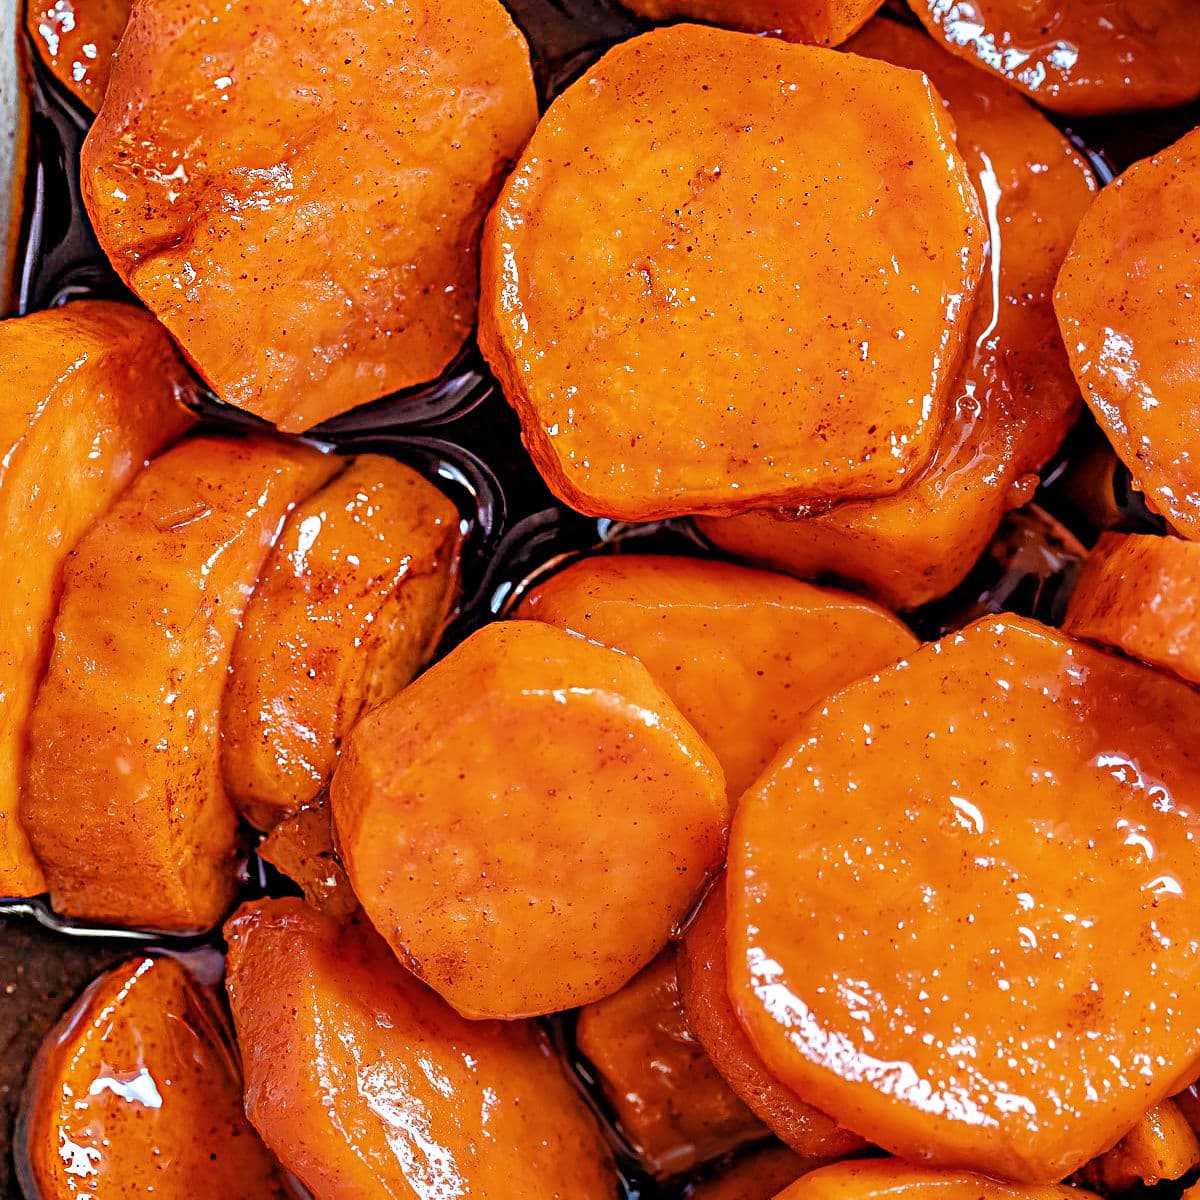 https://www.momontimeout.com/wp-content/uploads/2020/11/candied-yams-recipe-squared.jpg